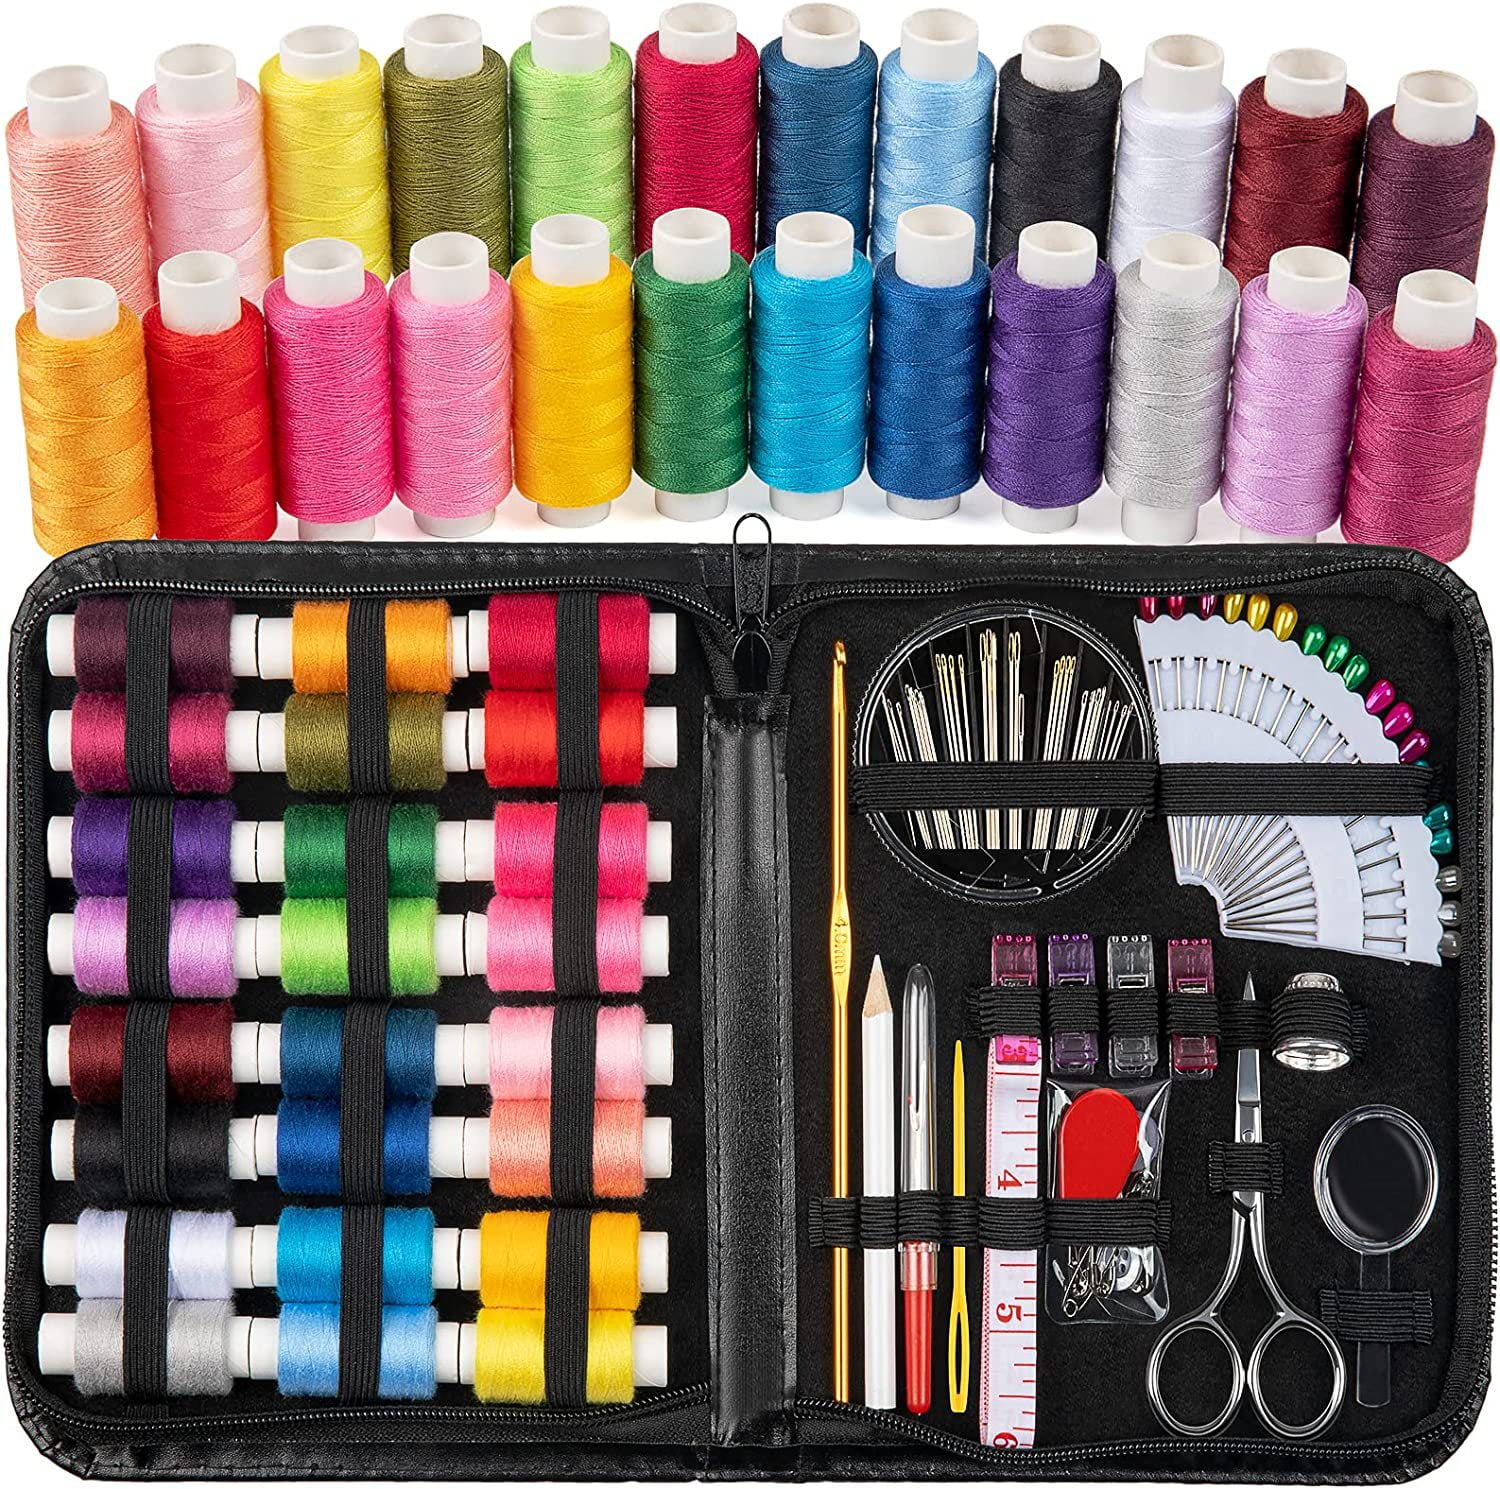 DUSCS Large Sewing Kit for Adults, 235 Pcs Needle and Thread Kit with Basic Sewing Supplies and Accessories for Travel Small Fixes, Emergency